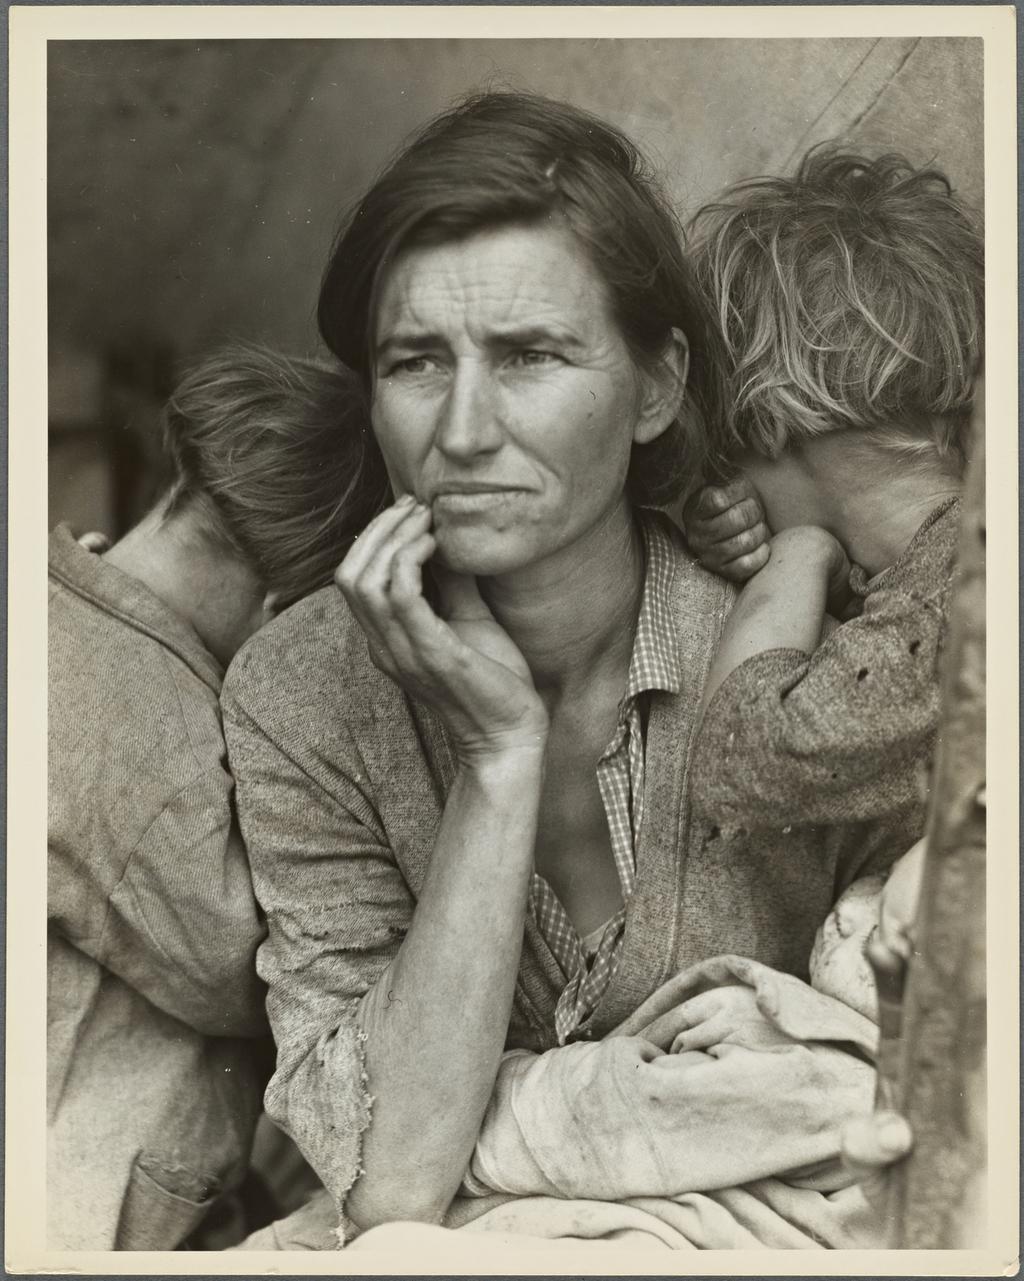 10/16/2018 GREAT DEPRESSION - Google Docs Committee Introduction The Great Depression, which lasted from 1929 to 1939, has been characterized as the worst economic downturn seen in the history of the